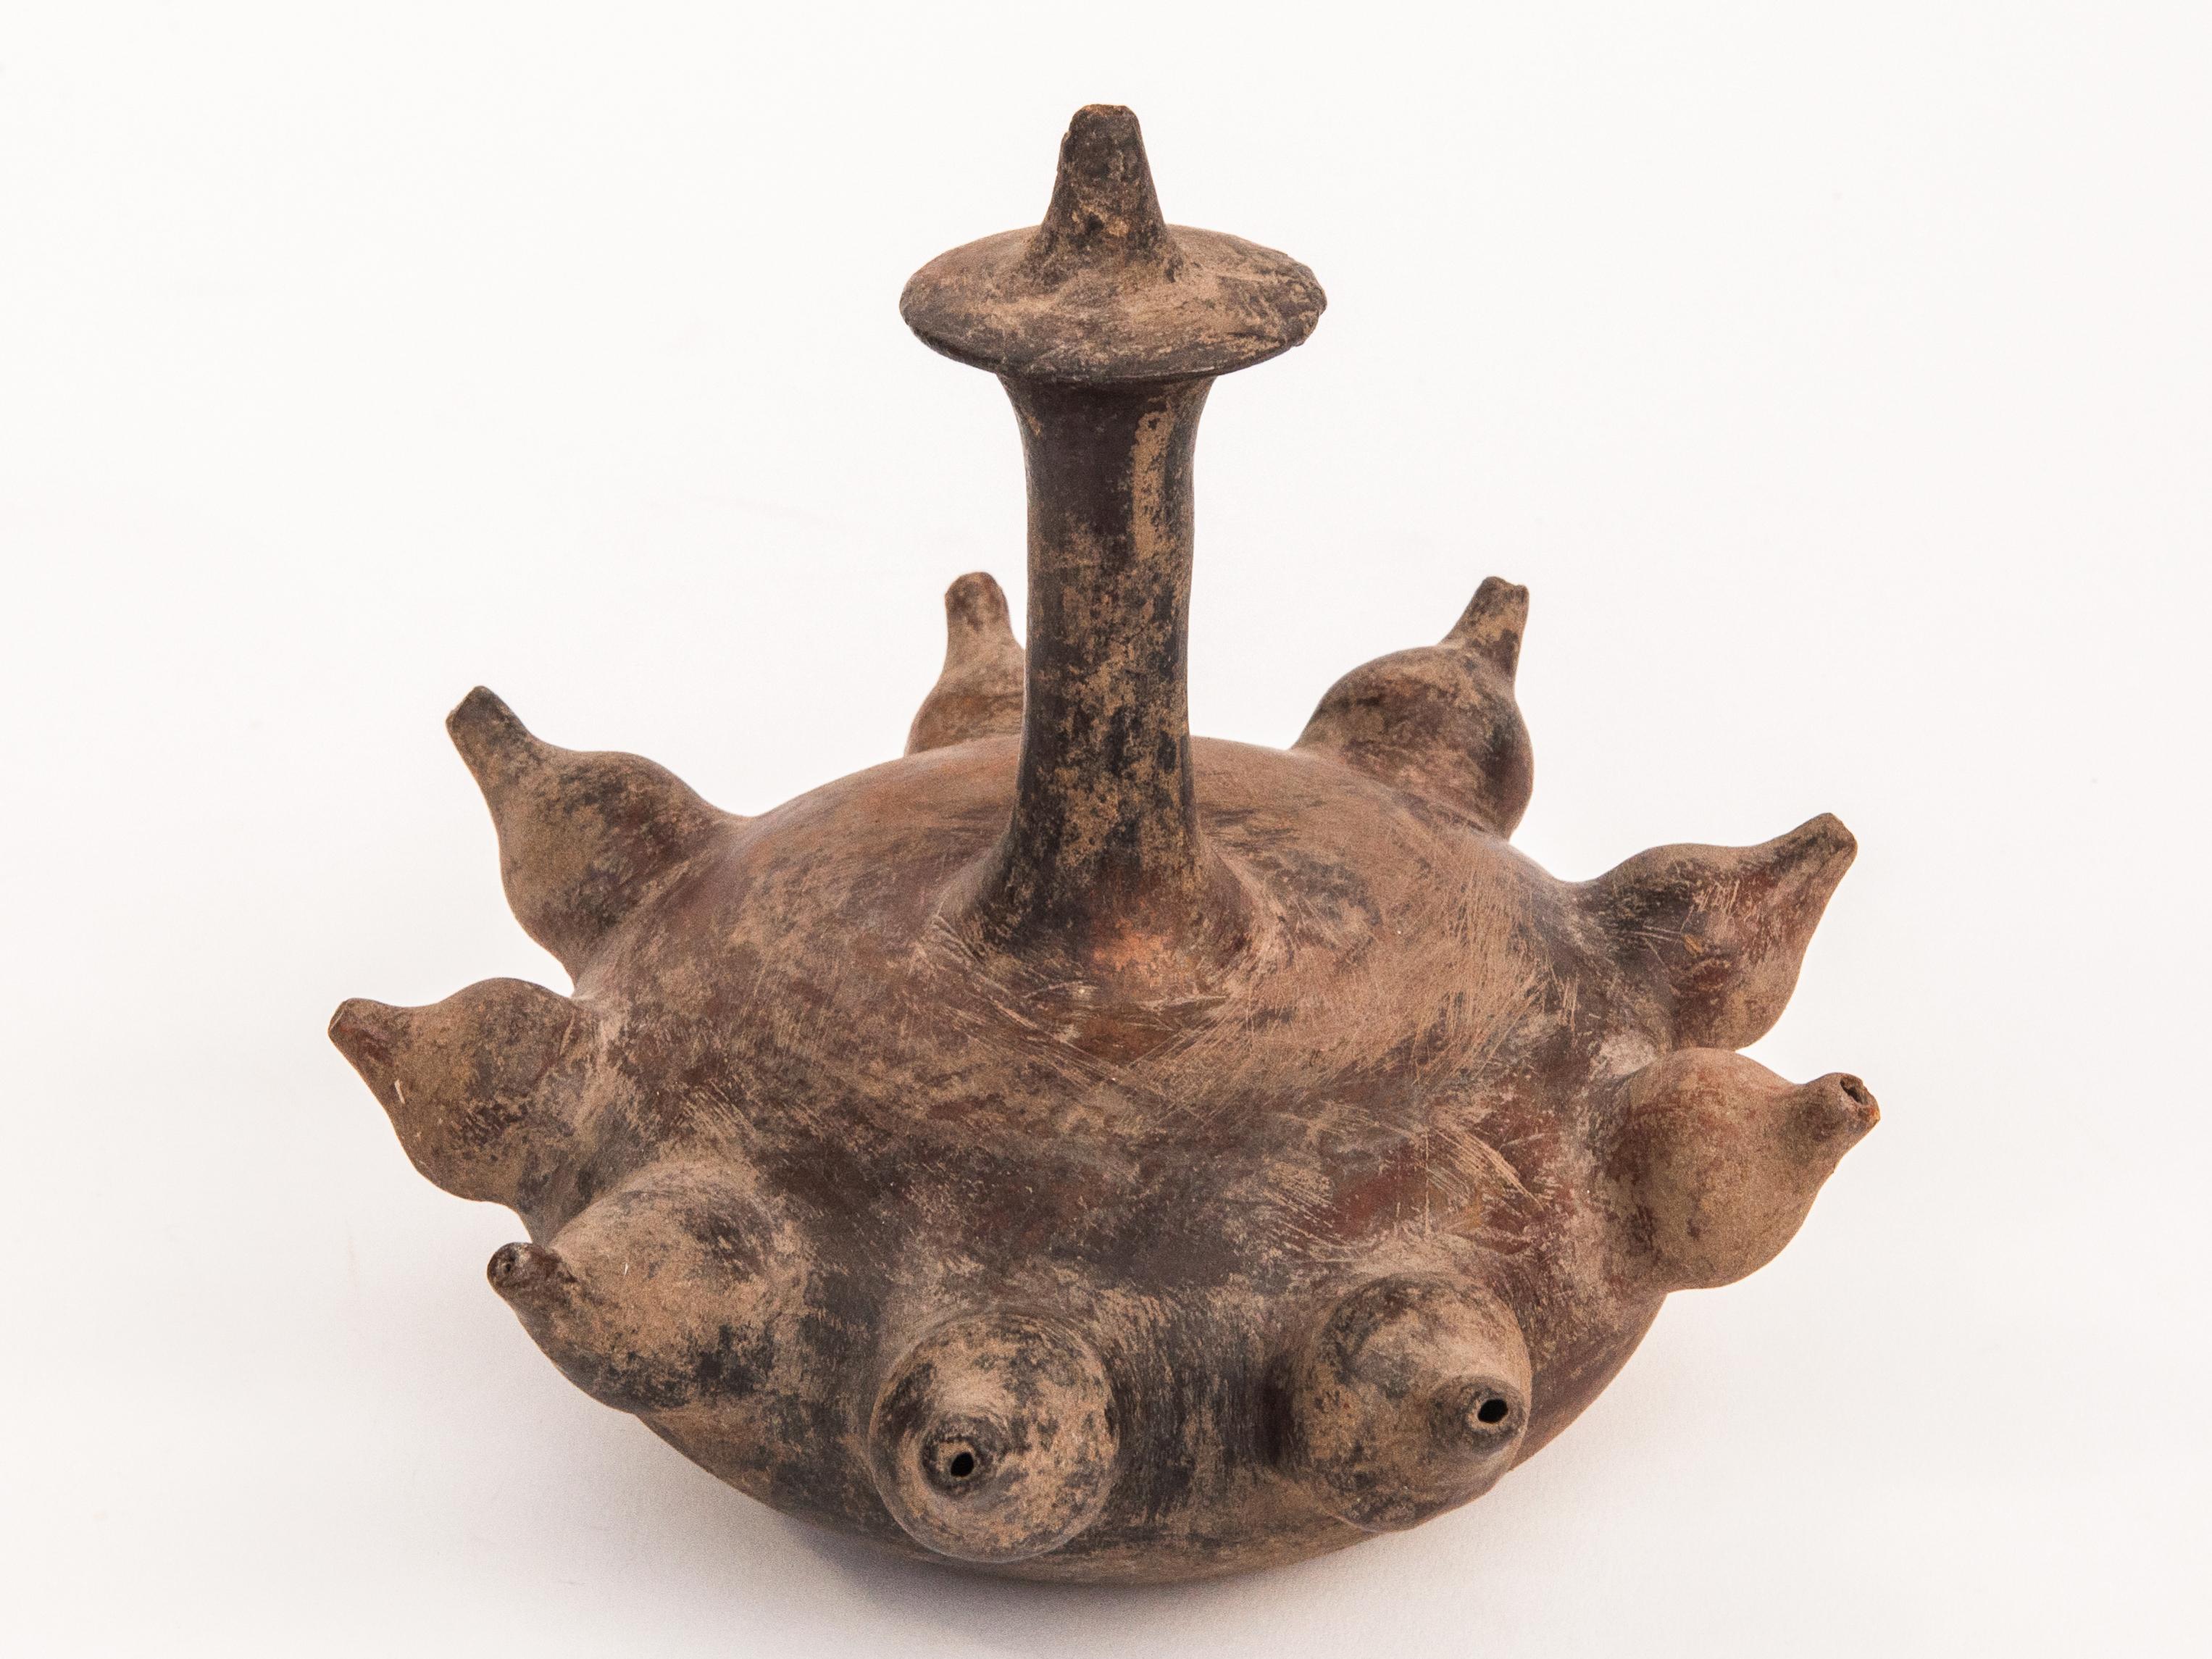 Old unglazed earthenware Kendi. Majapahit style. North or East Java. Late 19th century.
Kendi are pouring and drinking vessels found throughout Southeast Asia since ancient times, and were used in day to day life, as well as for ritual purposes. The